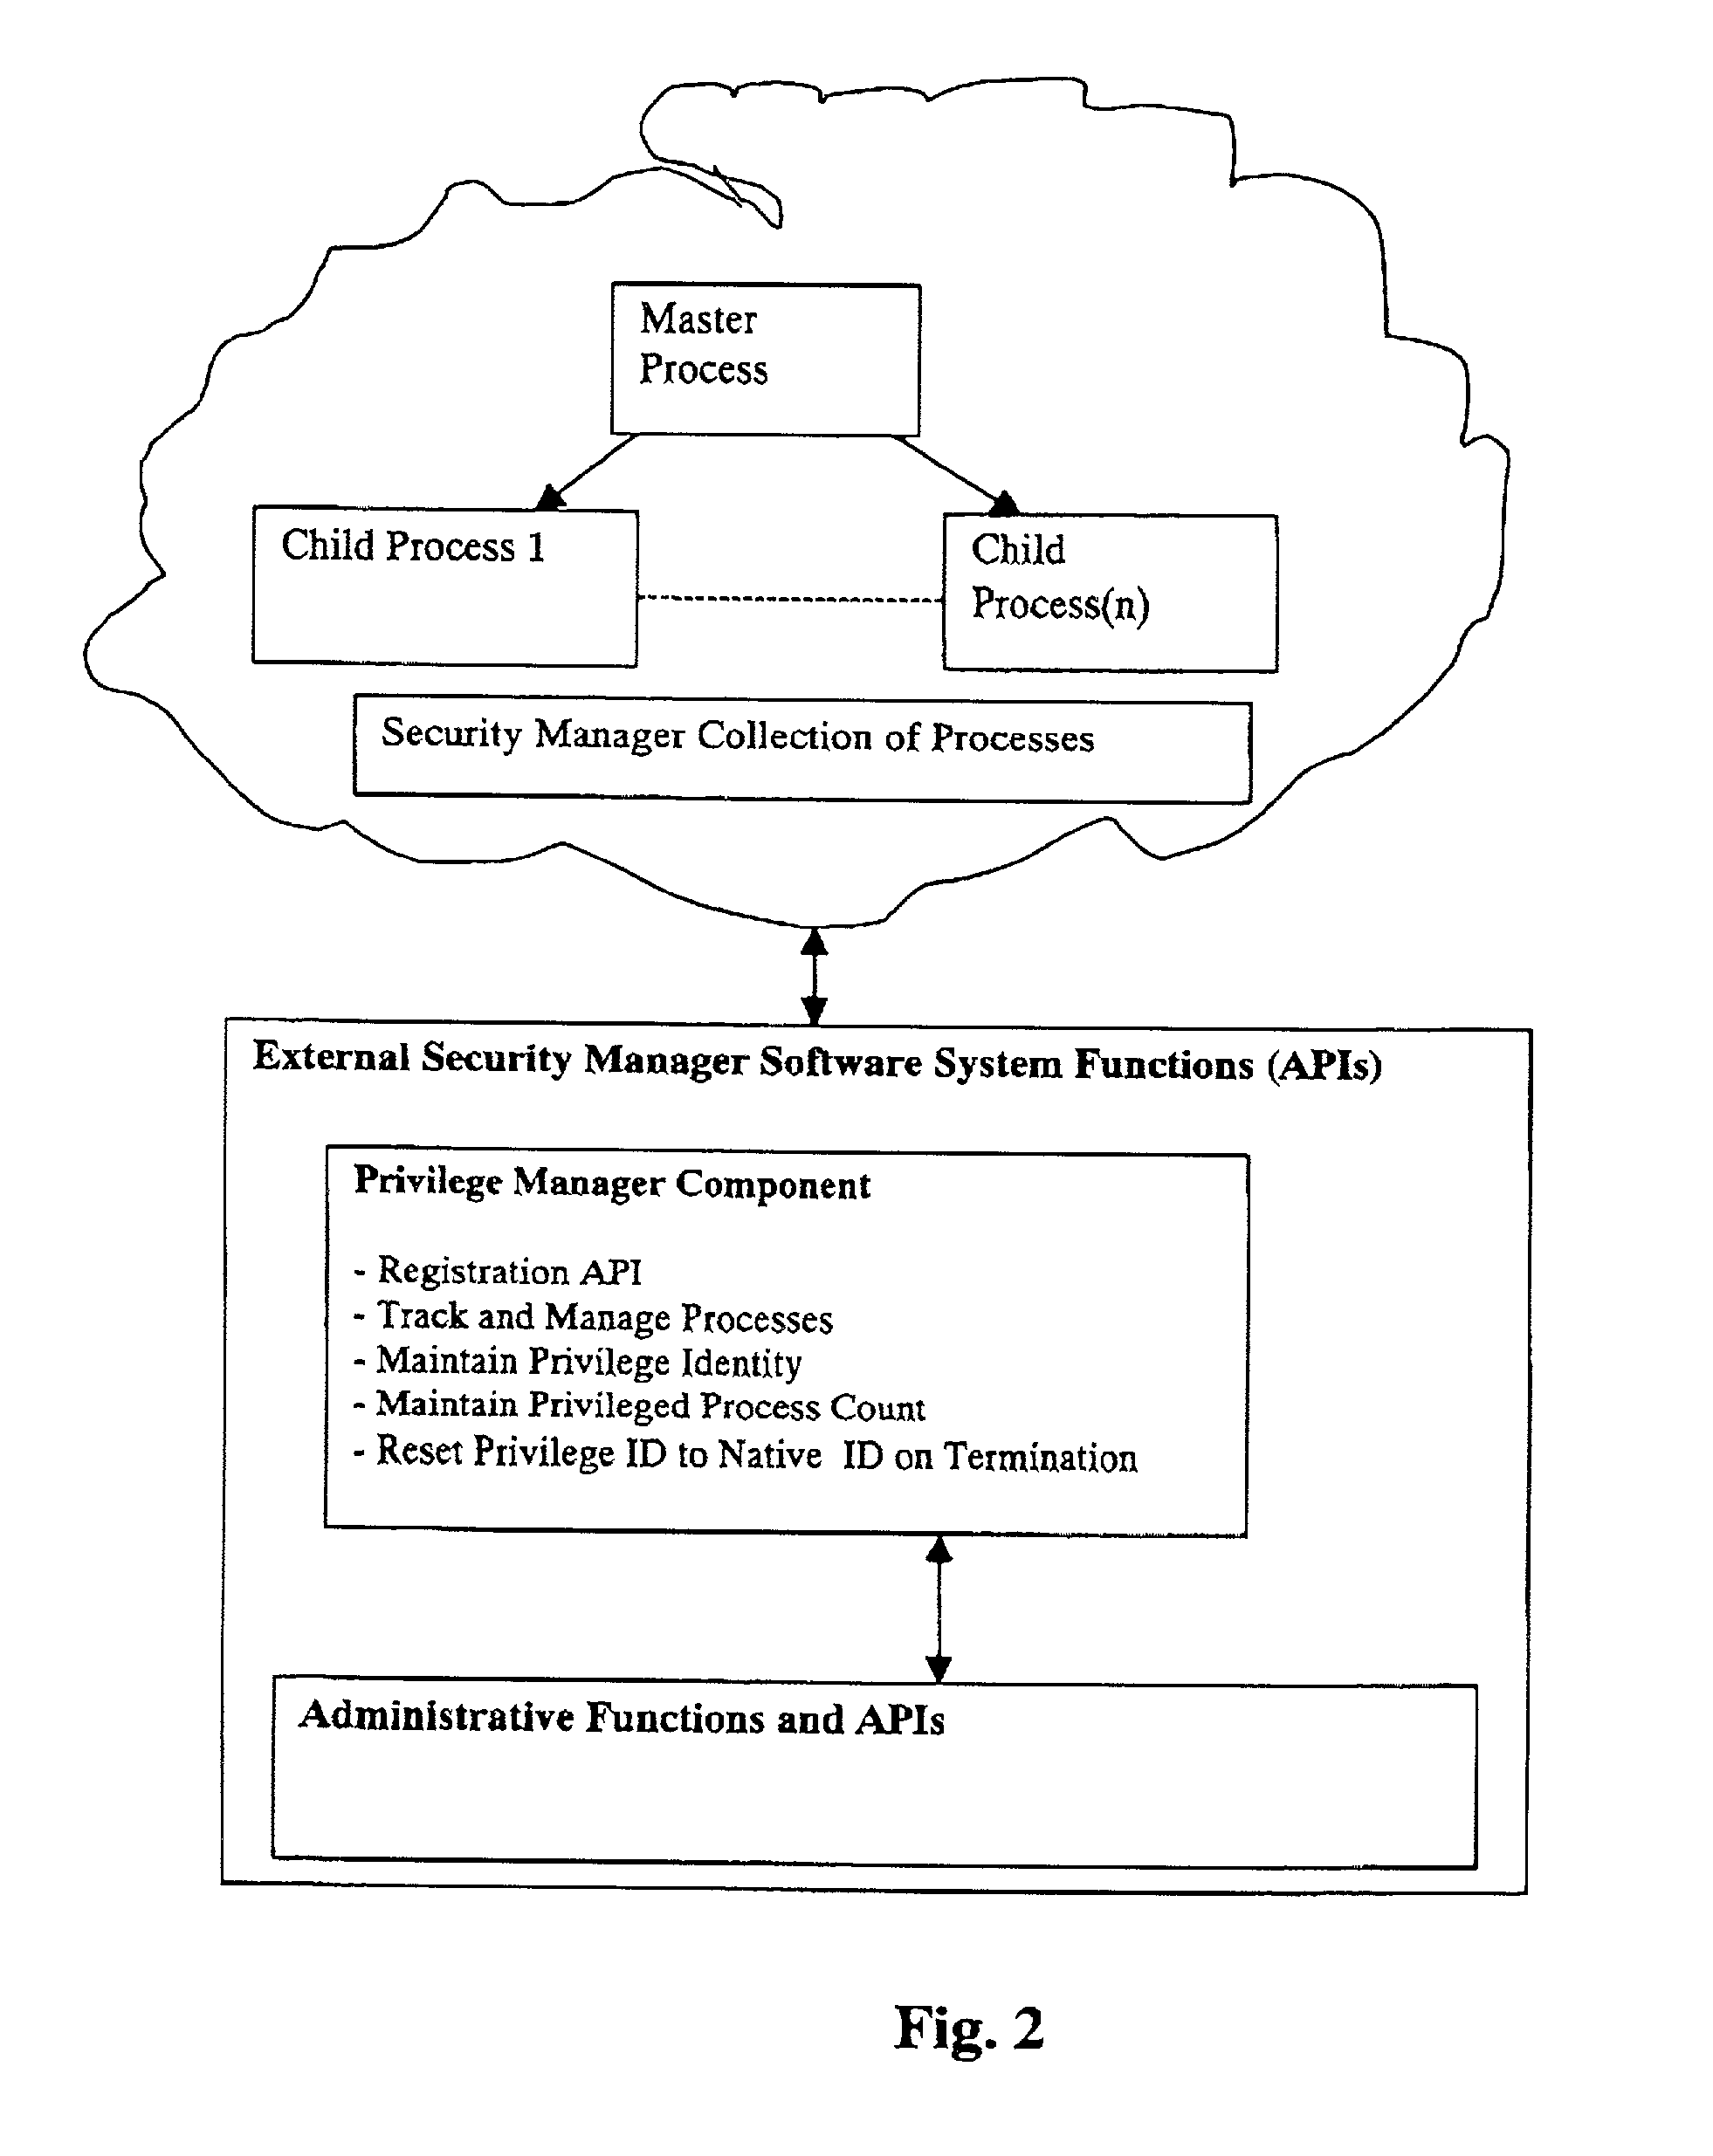 Method for transferring privilege access to a resource manager with subsequent loss of privilege by the initiating identity